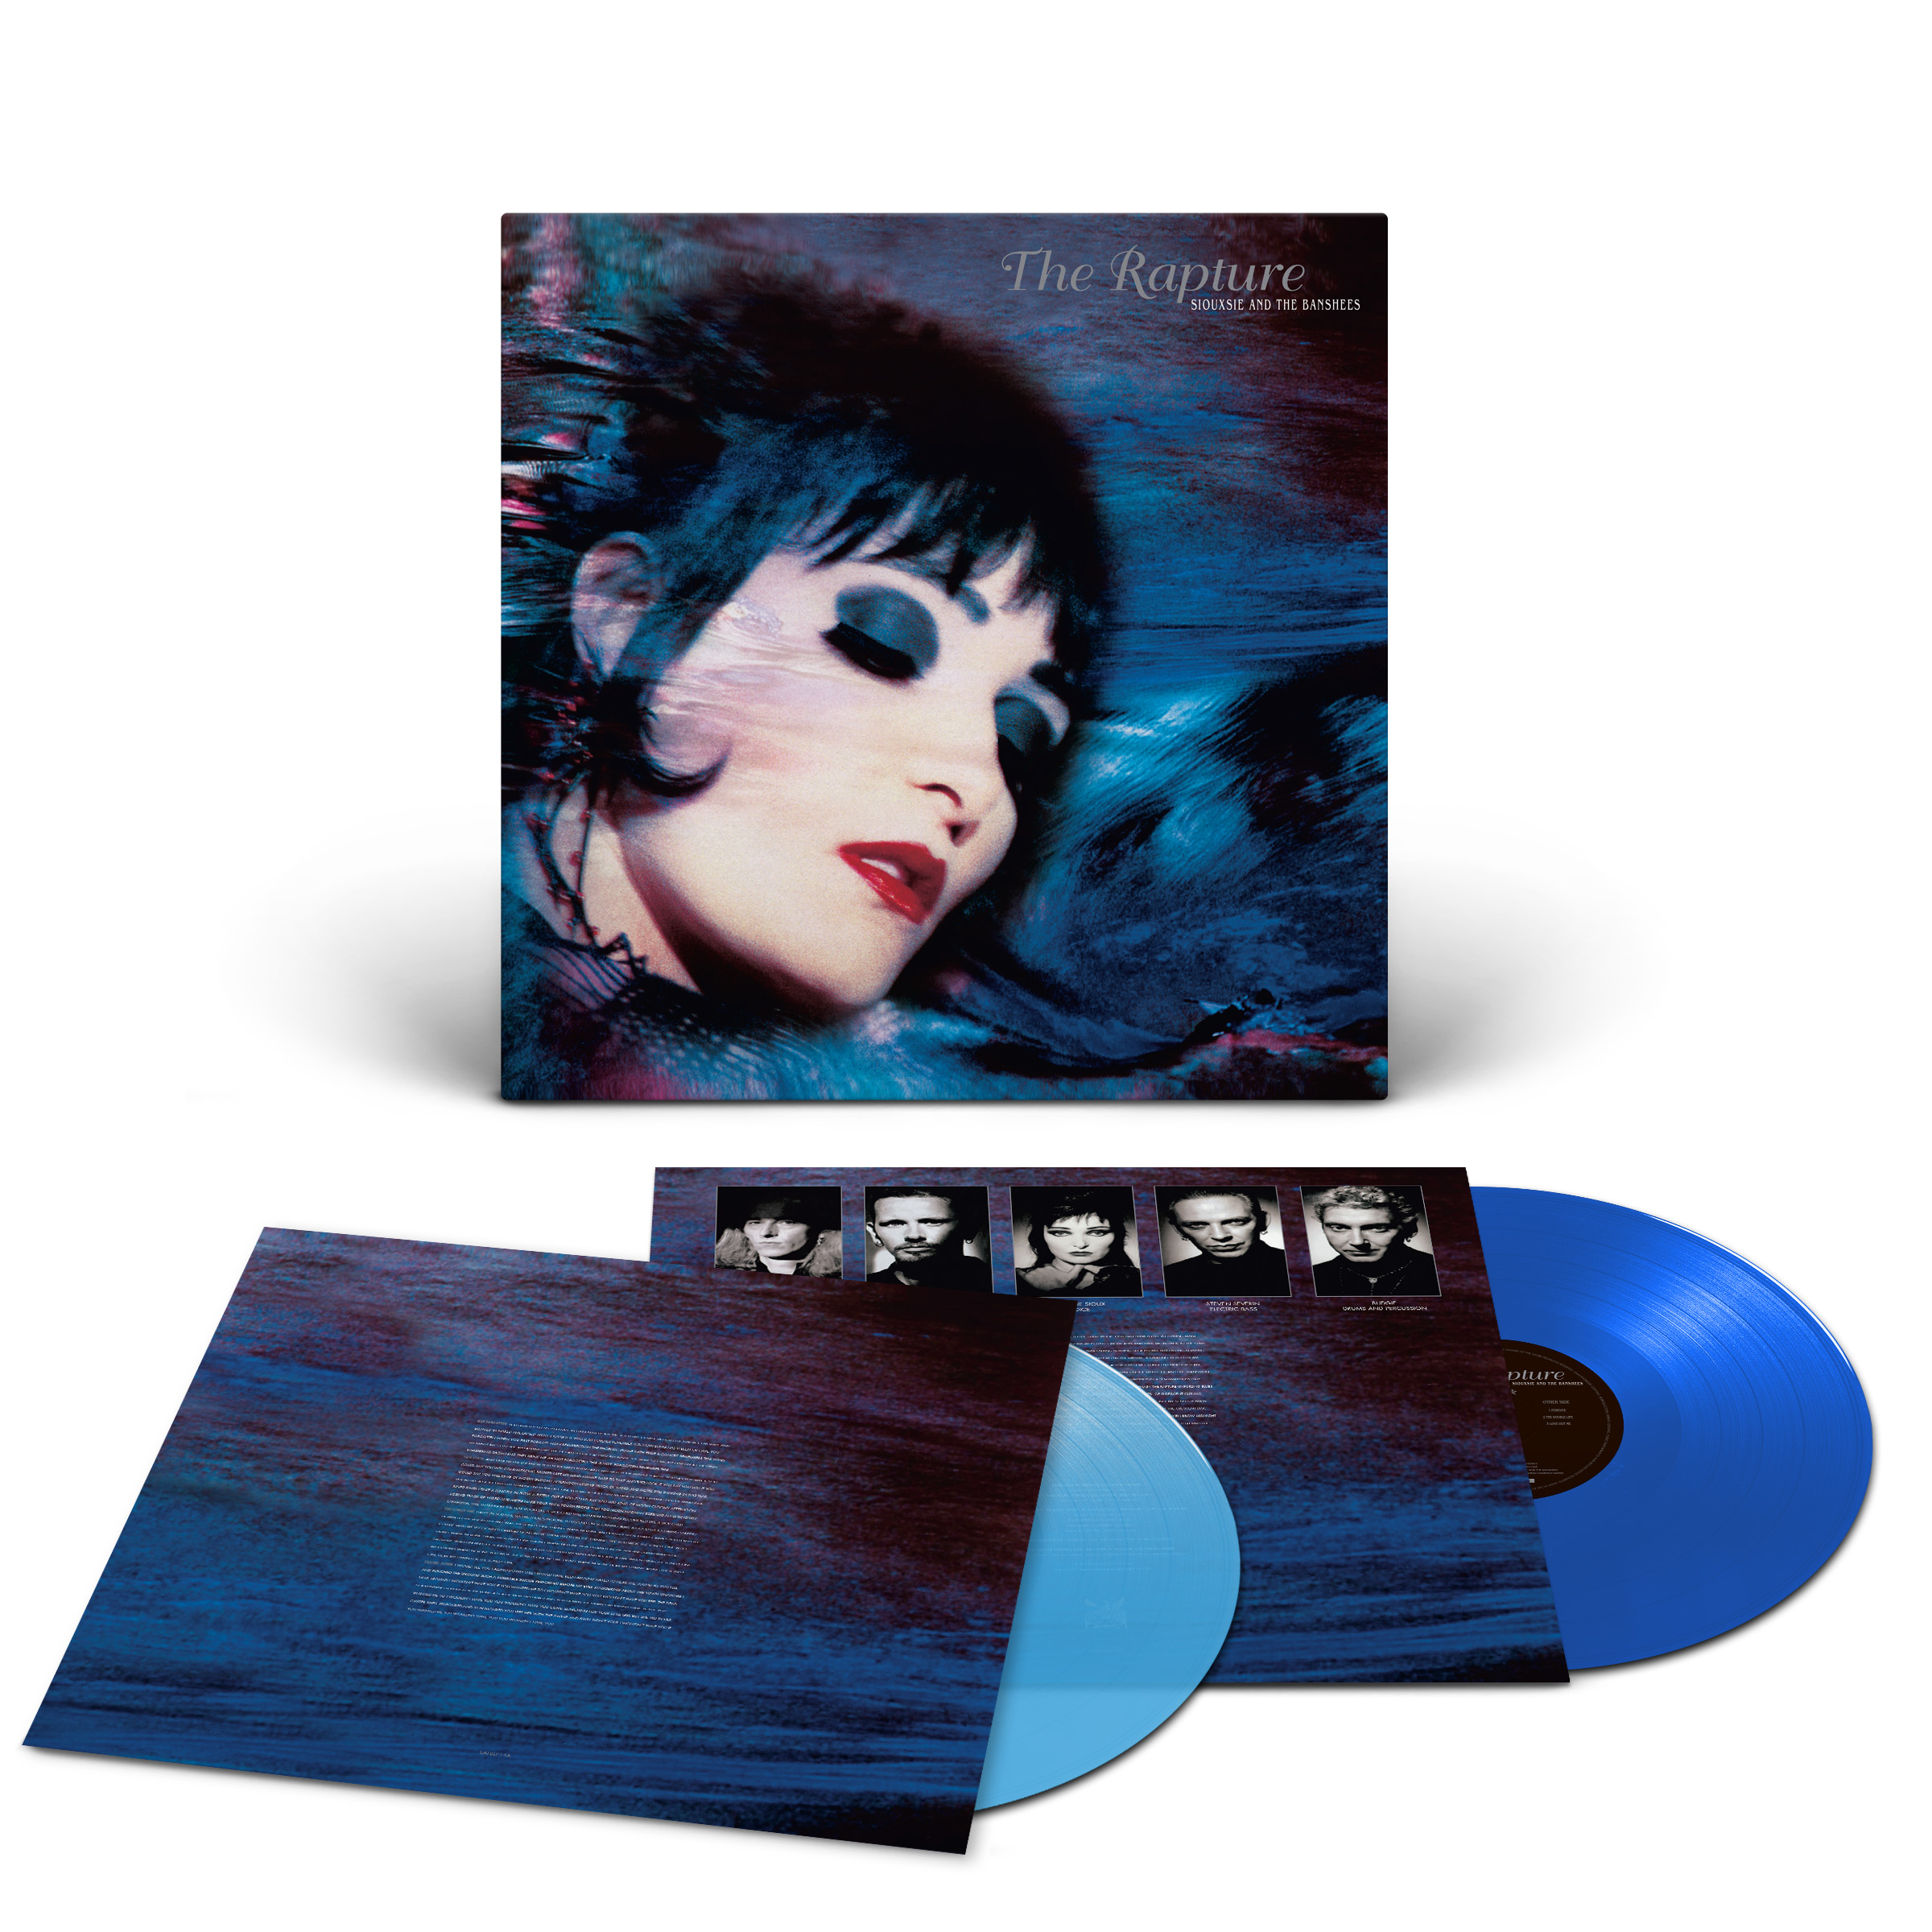 Siouxsie & The Banshees "The Rapture" Sky Blue 🔵🔵 2LP